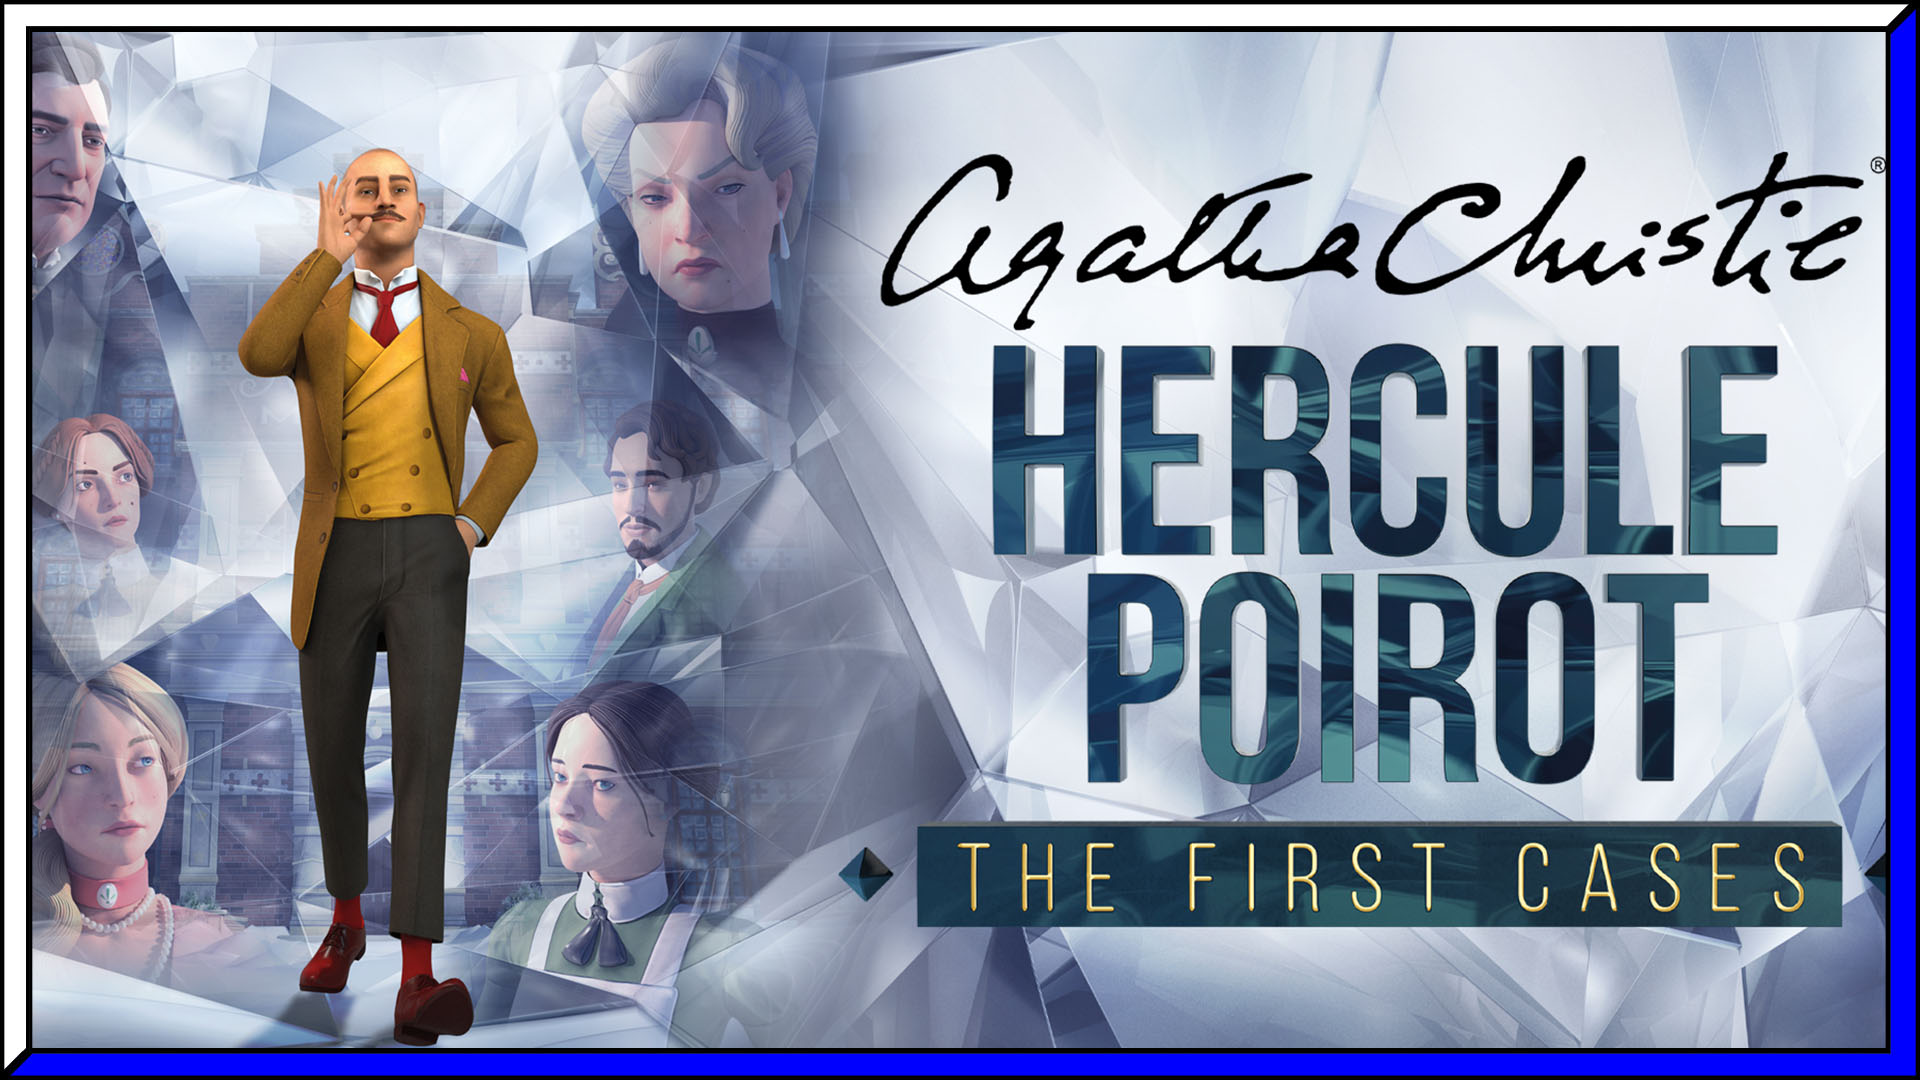 Hercule Poirot The First Cases Gaming Wallpapers